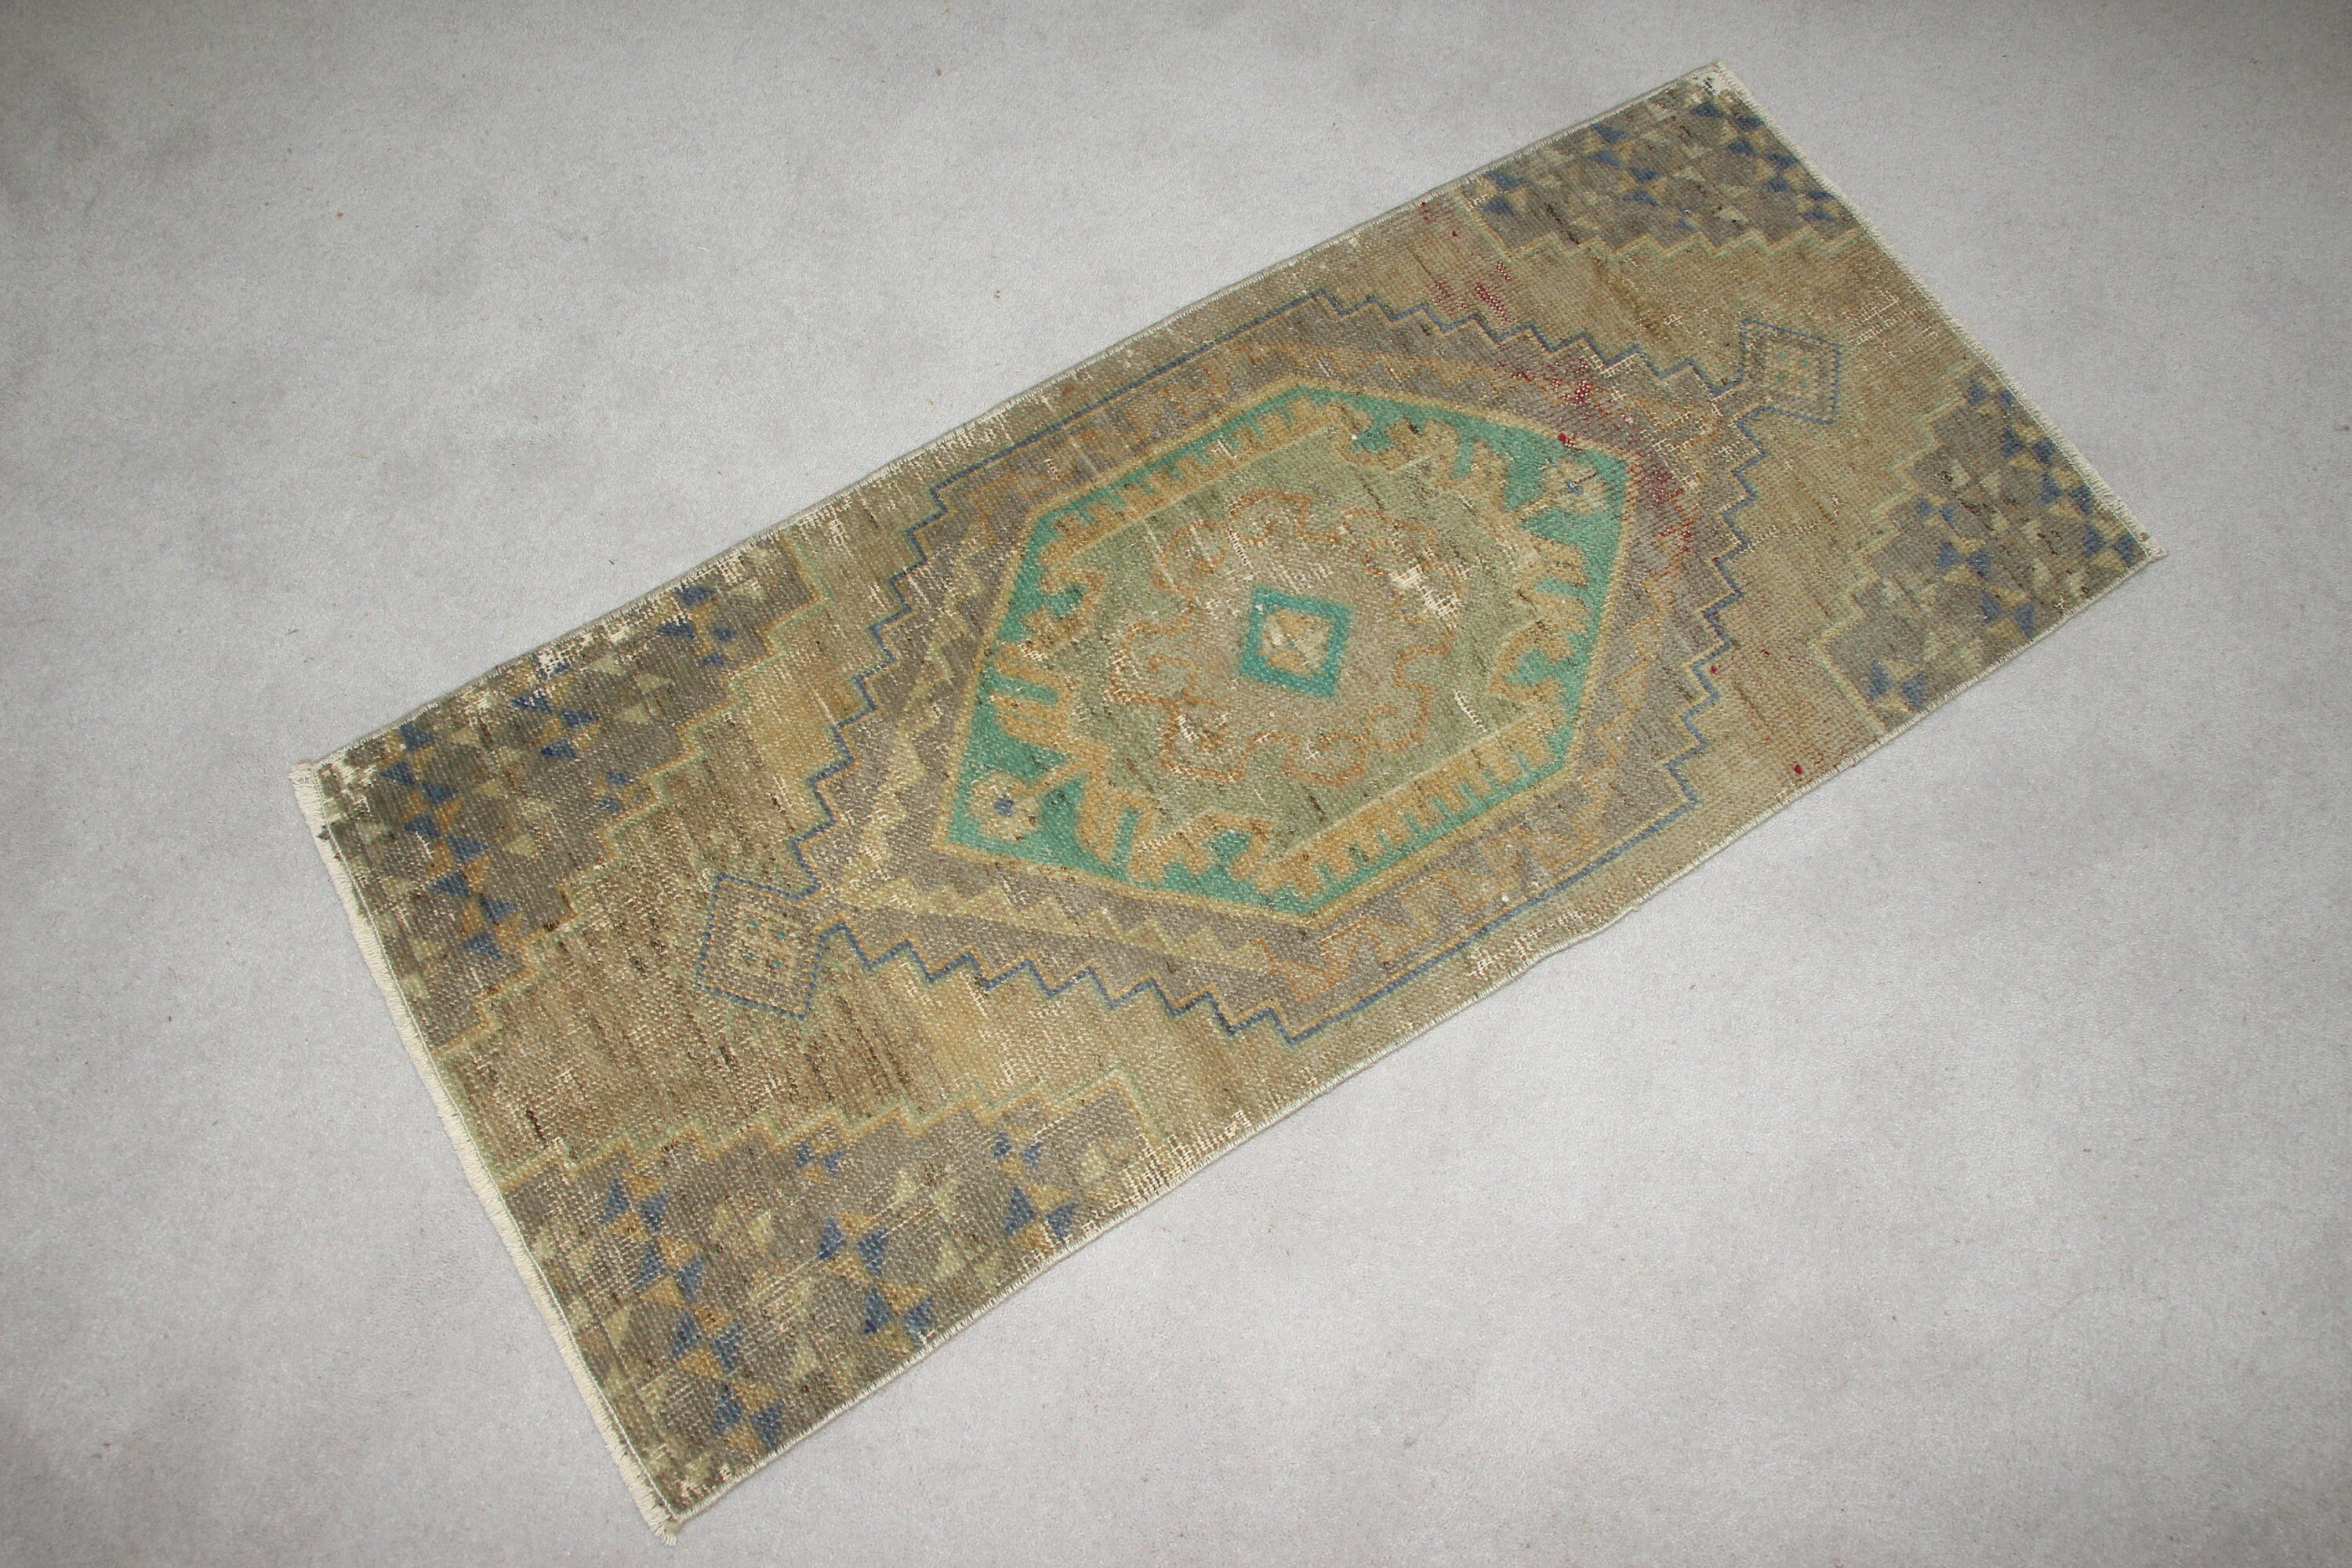 Vintage Rugs, Kitchen Rug, Home Decor Rug, Entry Rug, 1.5x3.2 ft Small Rug, Turkish Rug, Rugs for Nursery, Green Wool Rugs, Car Mat Rug